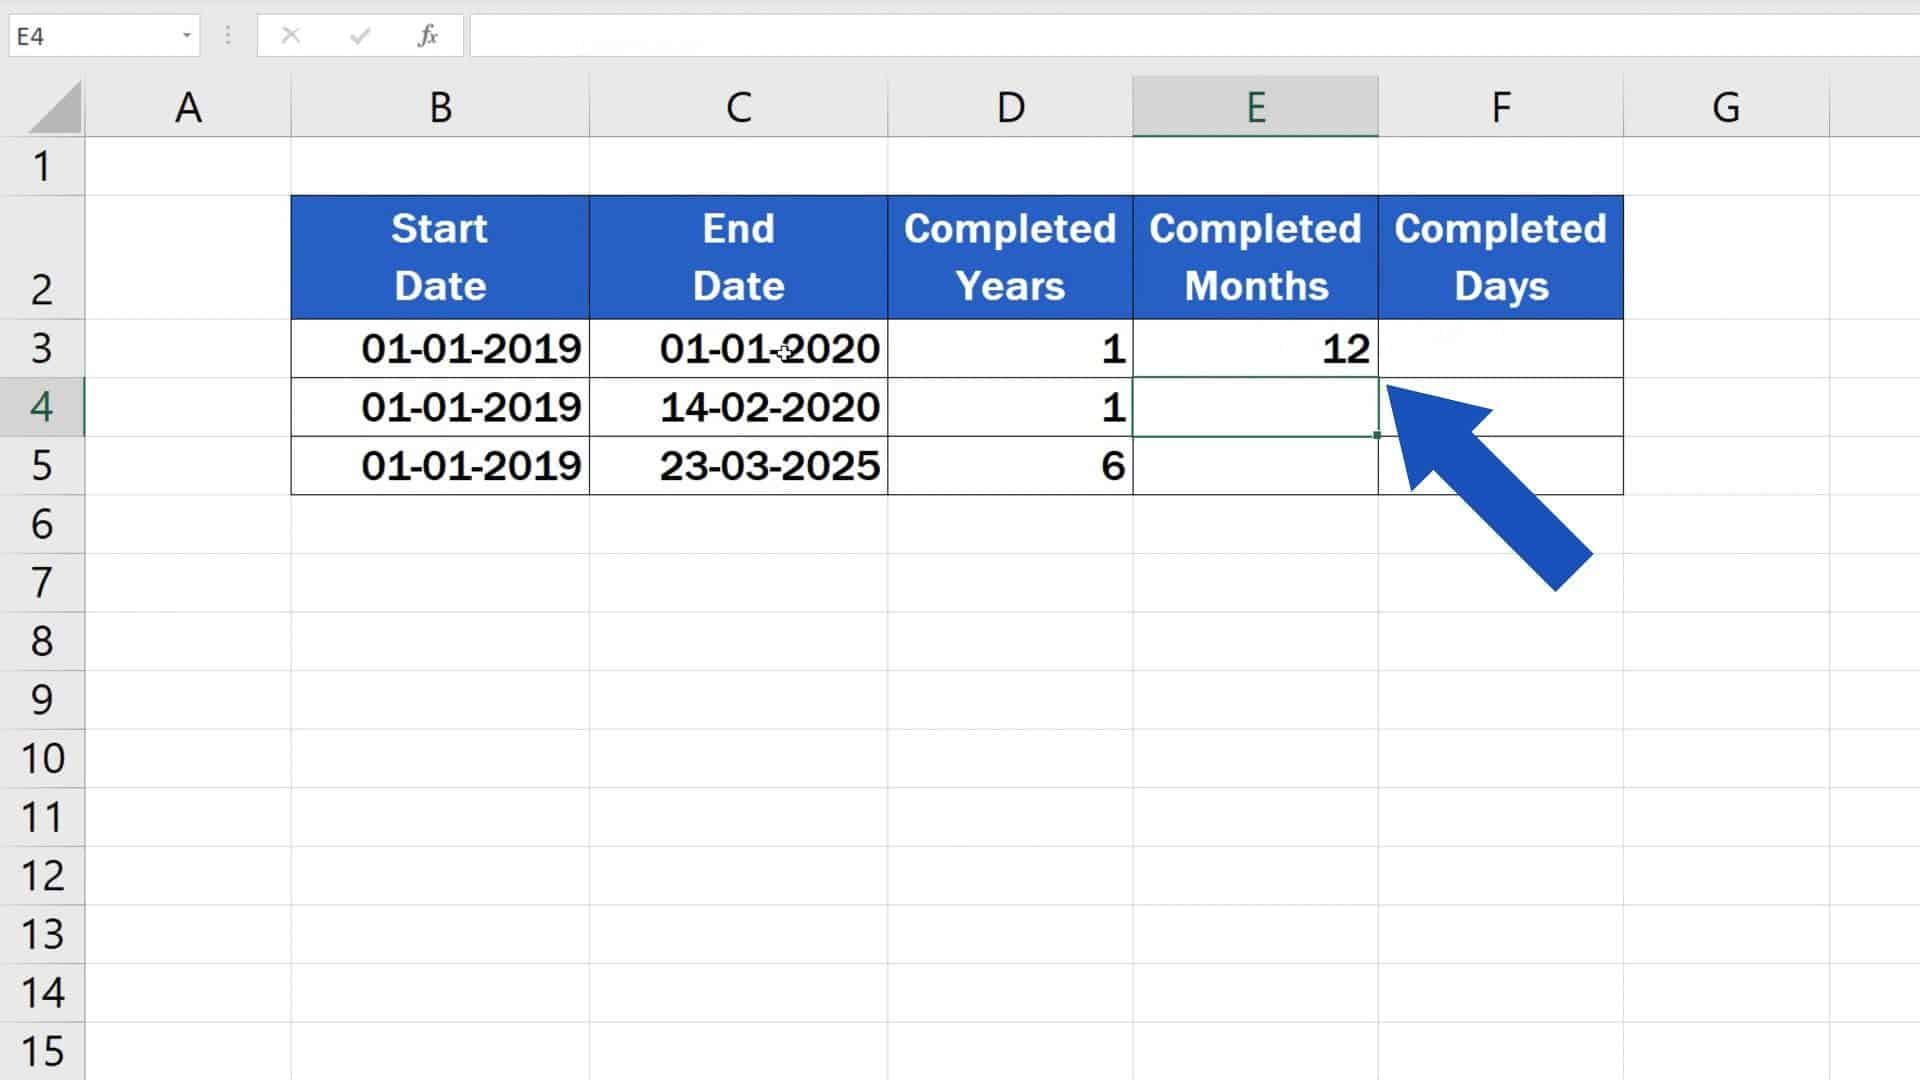 How to Calculate Difference Between Two Dates in Excel